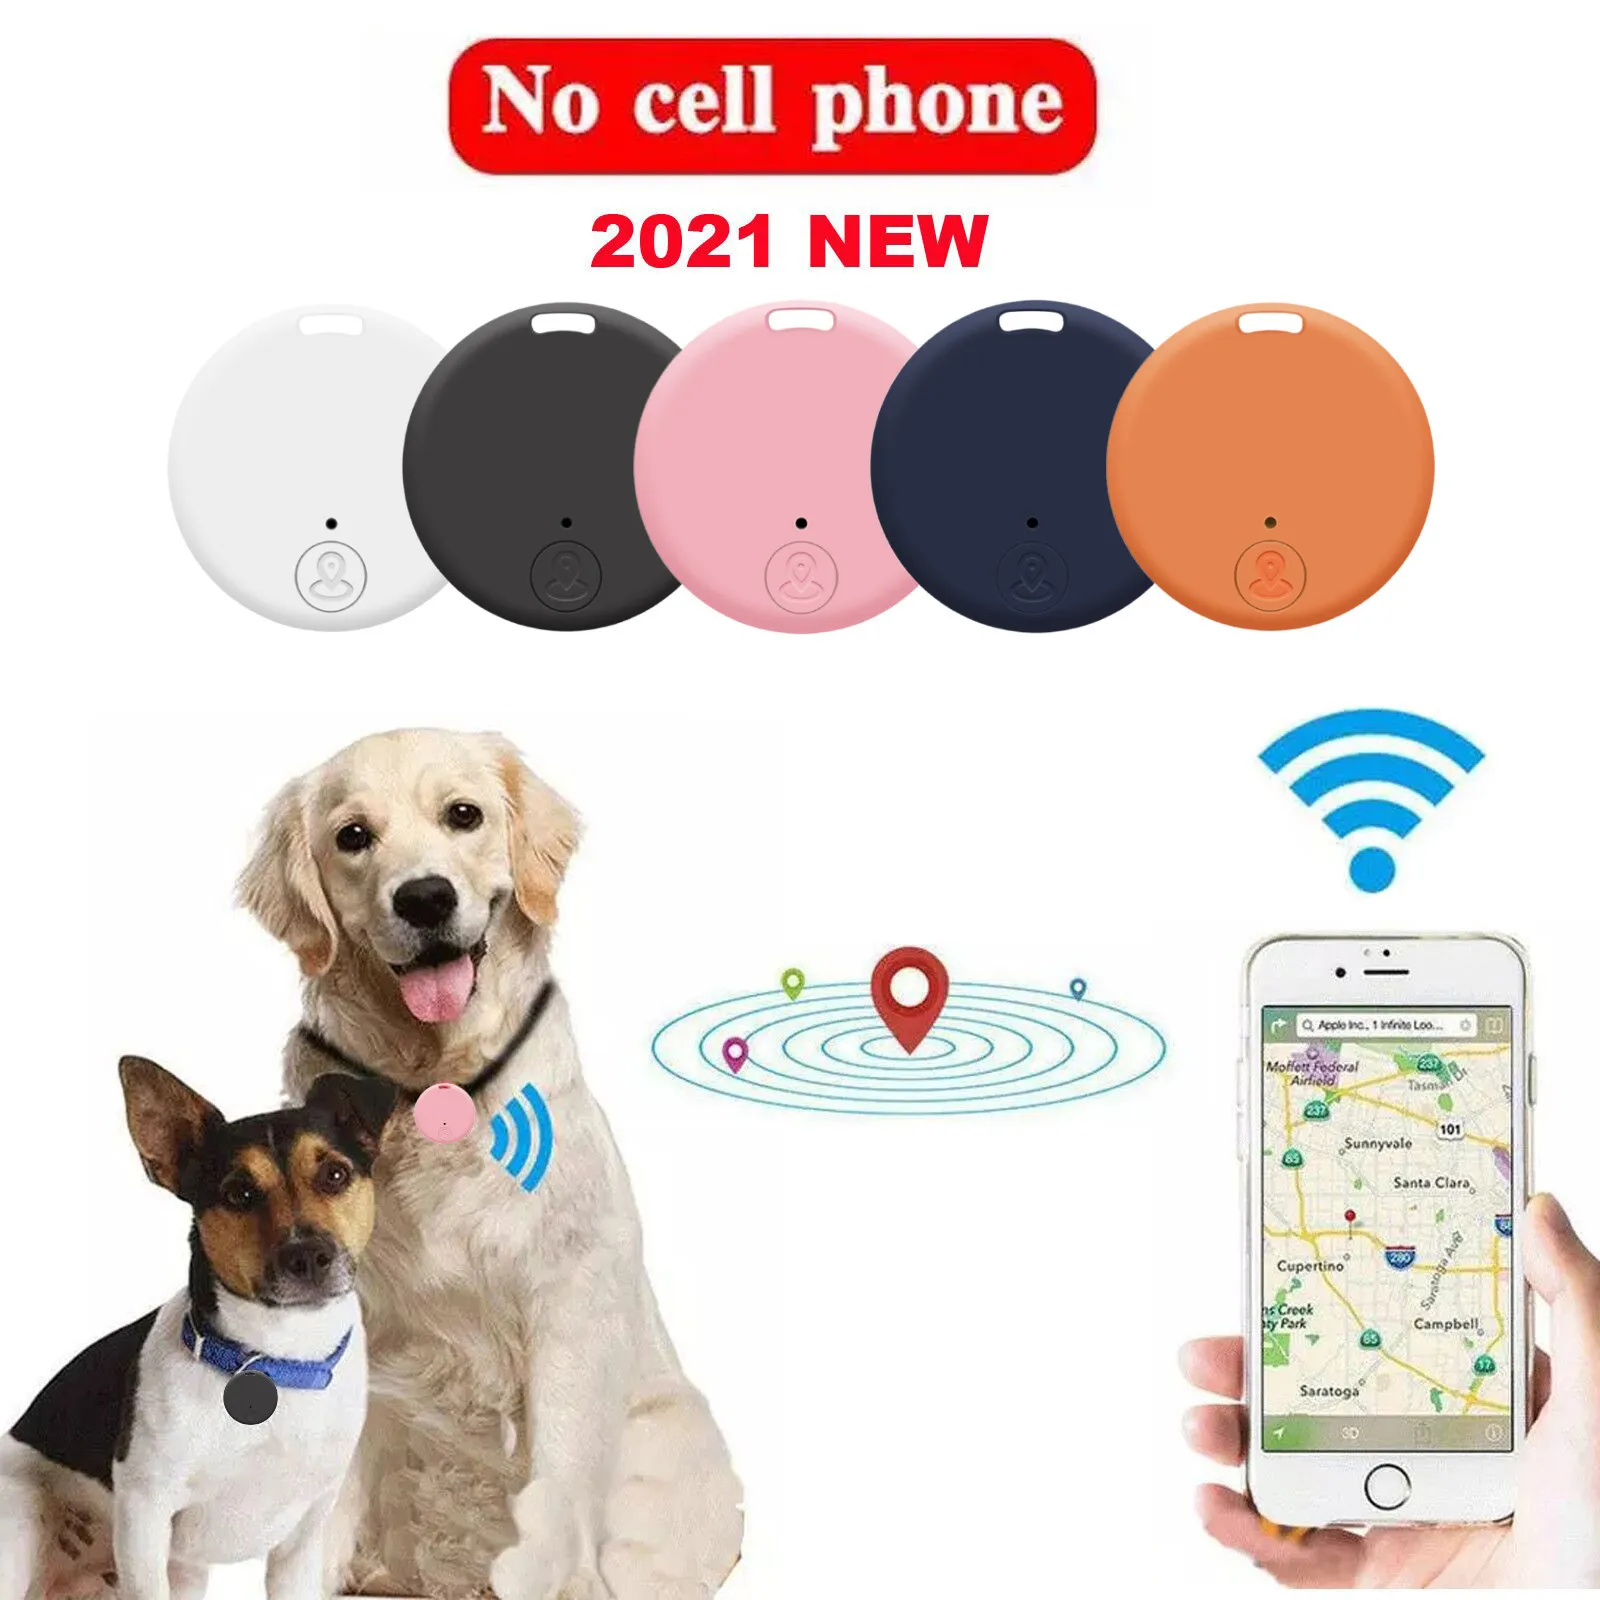 New Mini Pet GPS Locator Tracker Tracking Anti-Lost Device Locator Tracer For Pet Dog Cat Kids Car Wallet Key Collar Accesso panic button for elderly